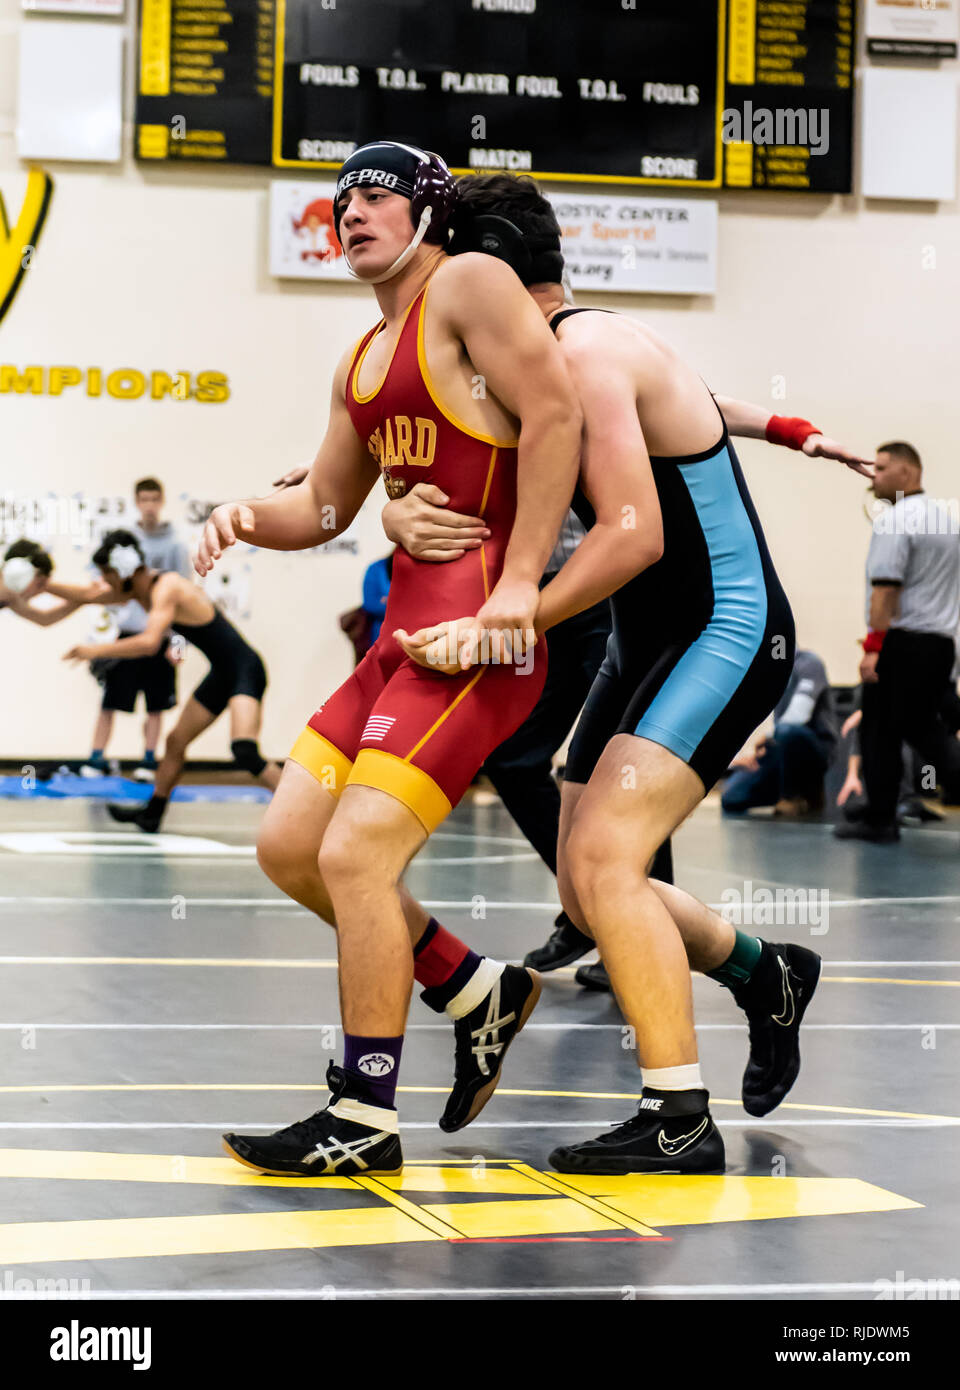 Wrestler from Oxnard High School attempting to break grip of Buena athlete during tournament at Ventura High School in California USA on February 2, 2 Stock Photo